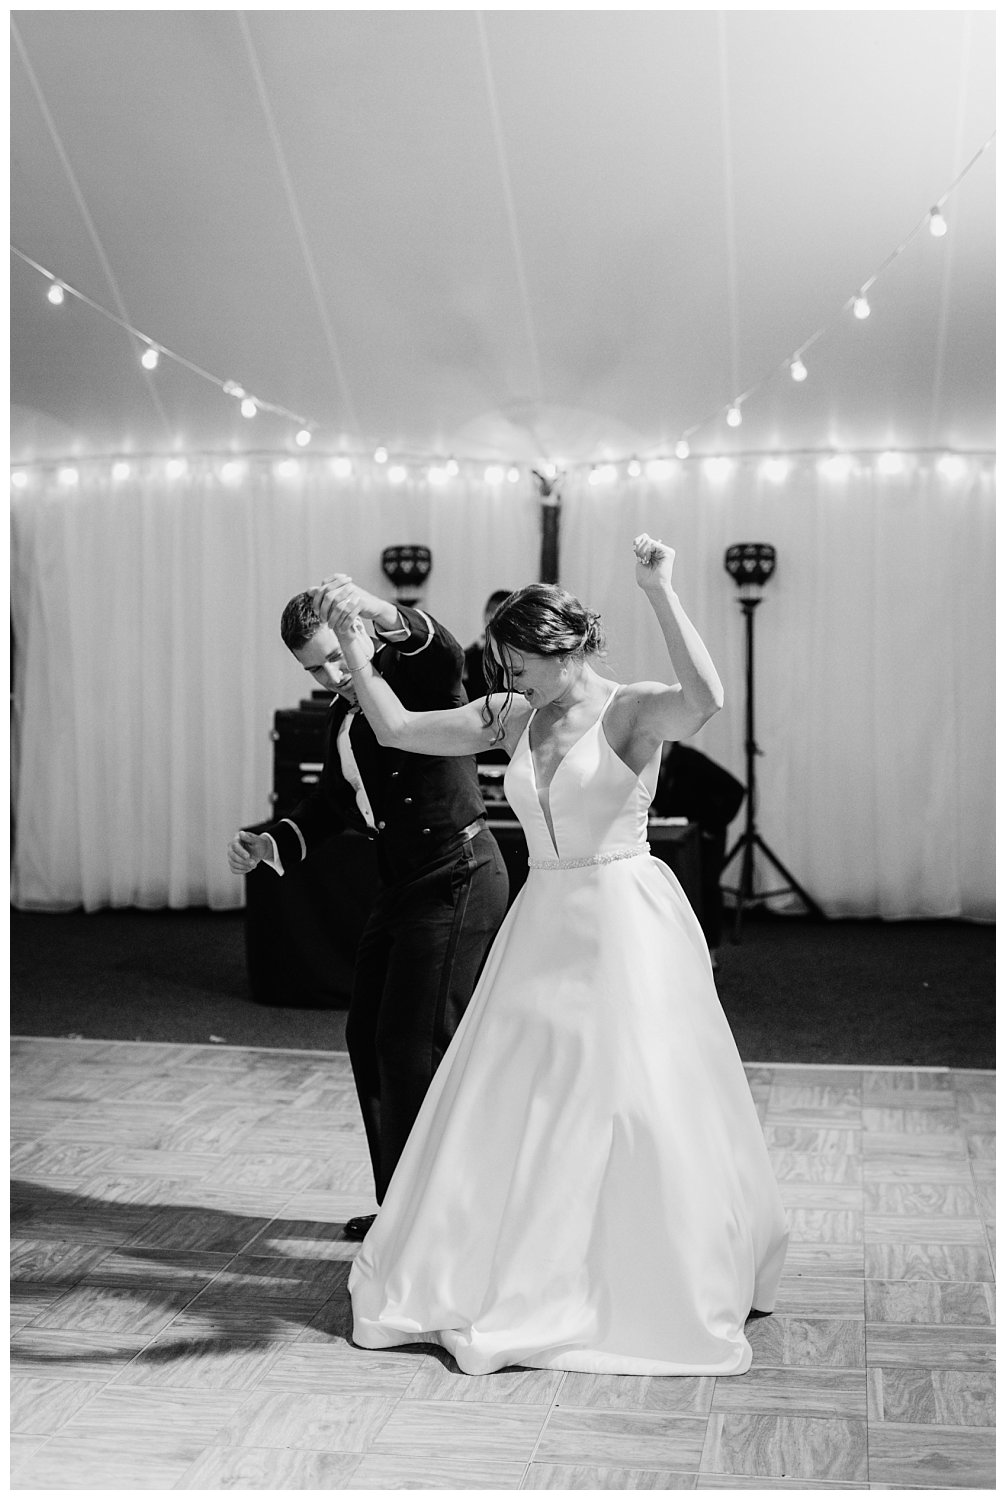 Bride and Groom first dance at Keswick Vineyard wedding photographed by Heather Dodge Photography